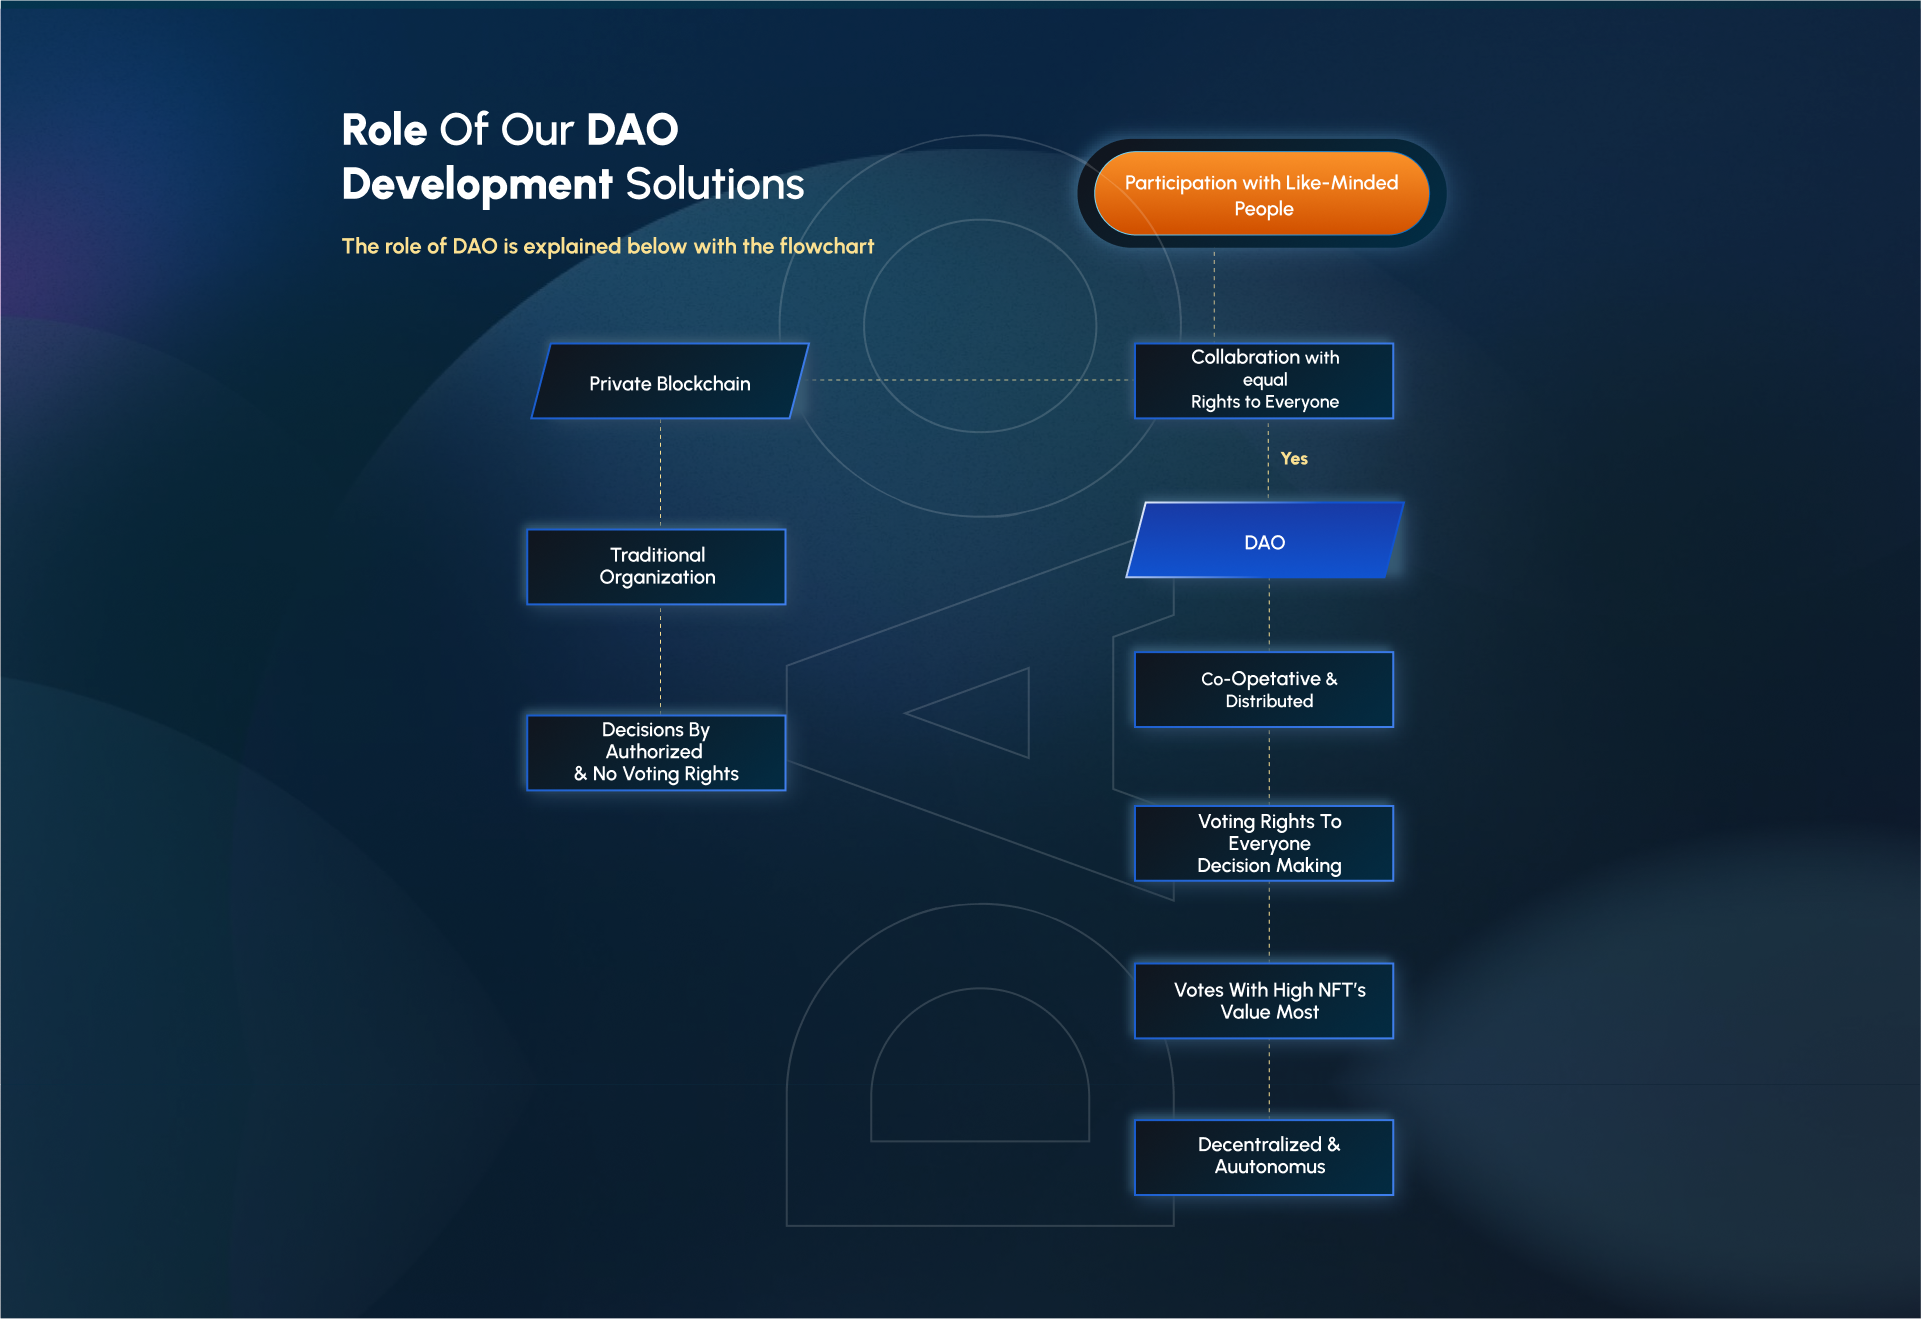 Role of Our DAO Development Solutions